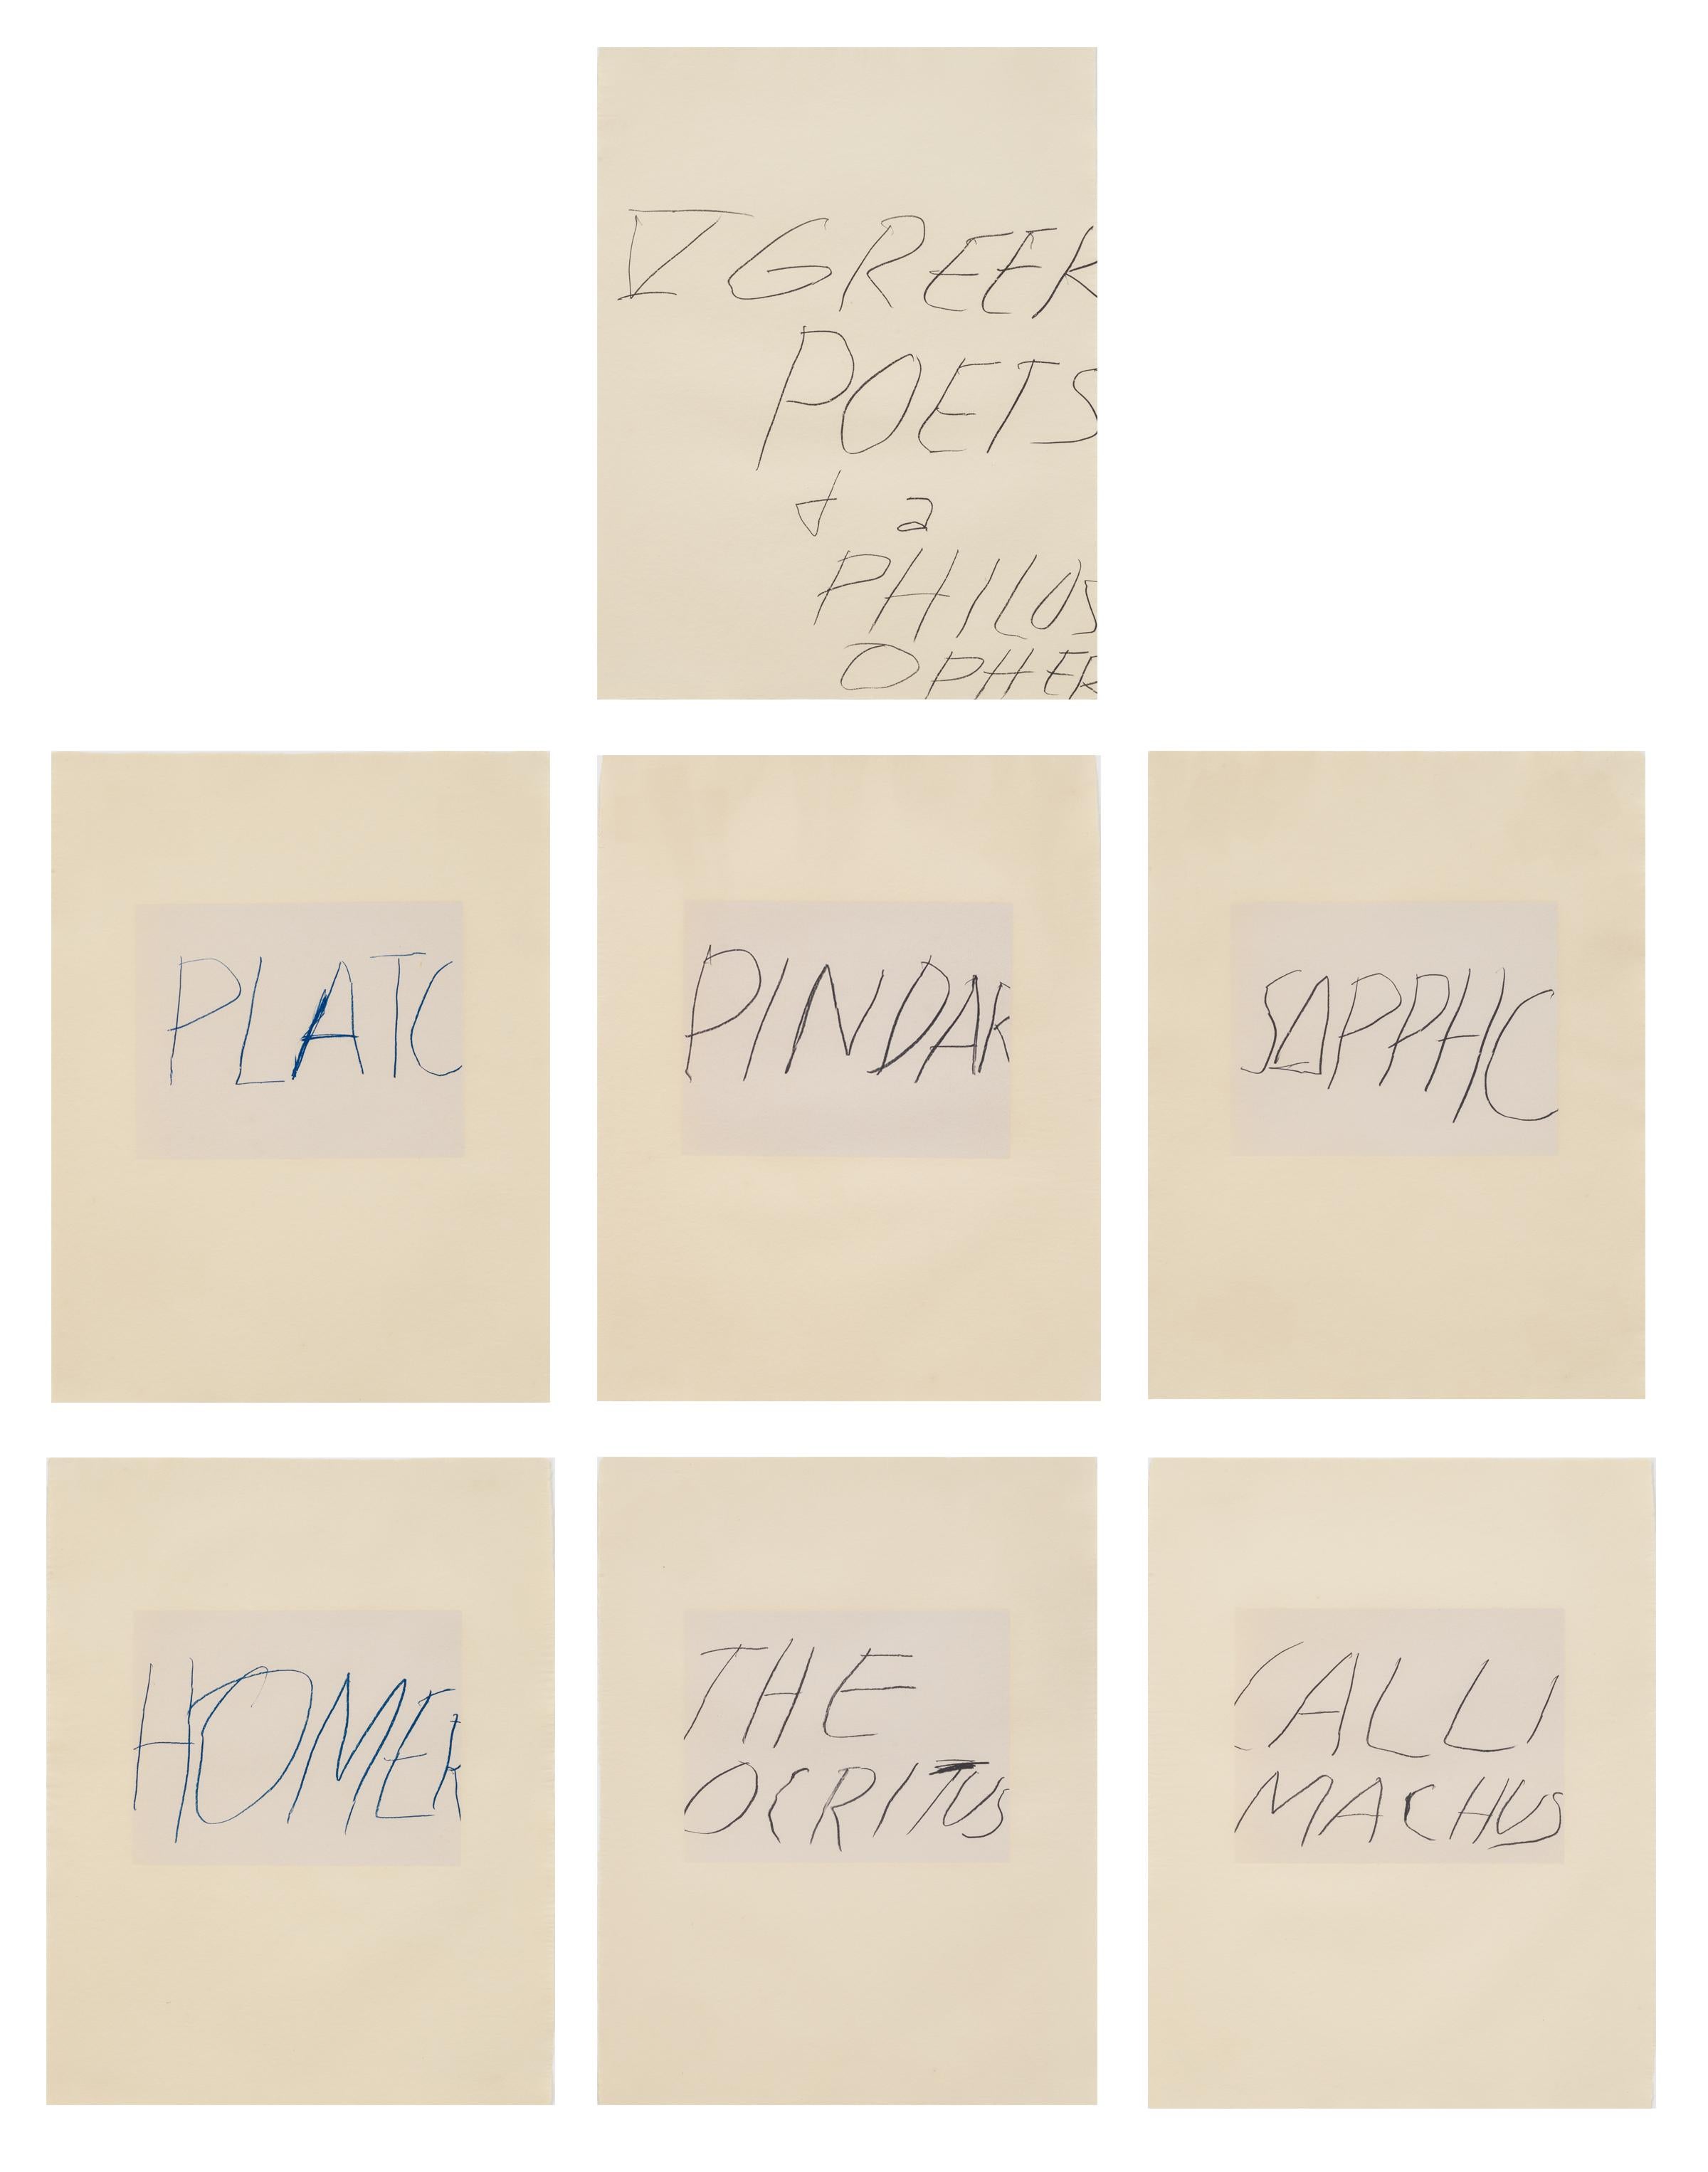 Cy Twombly Print - Five Greek Poets and a Philosopher